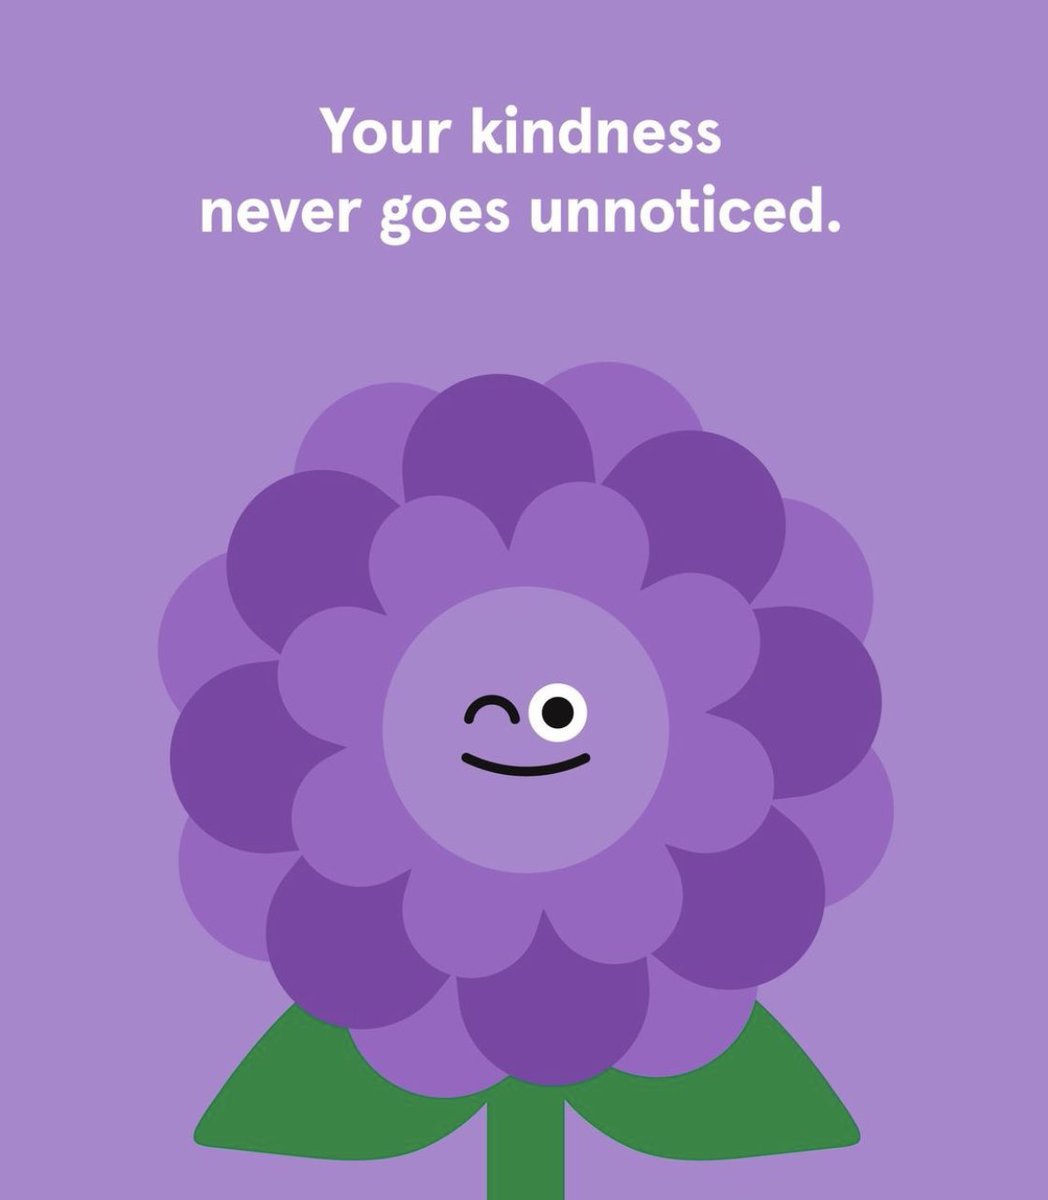 Your kindness never goes unnoticed here 💕 Image: @Headspace